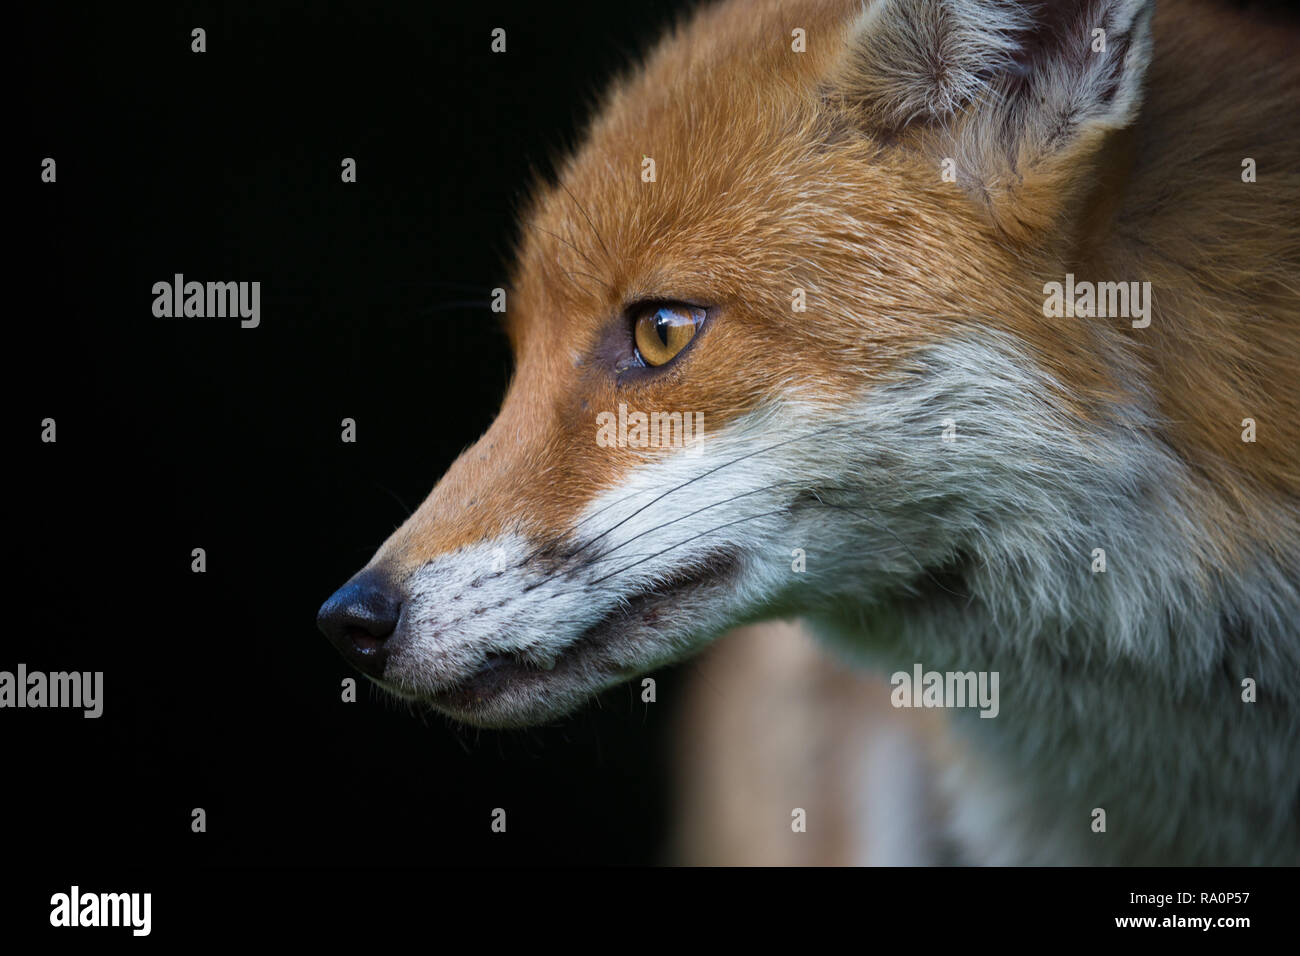 A Red fox portrait with a black background in London. Stock Photo